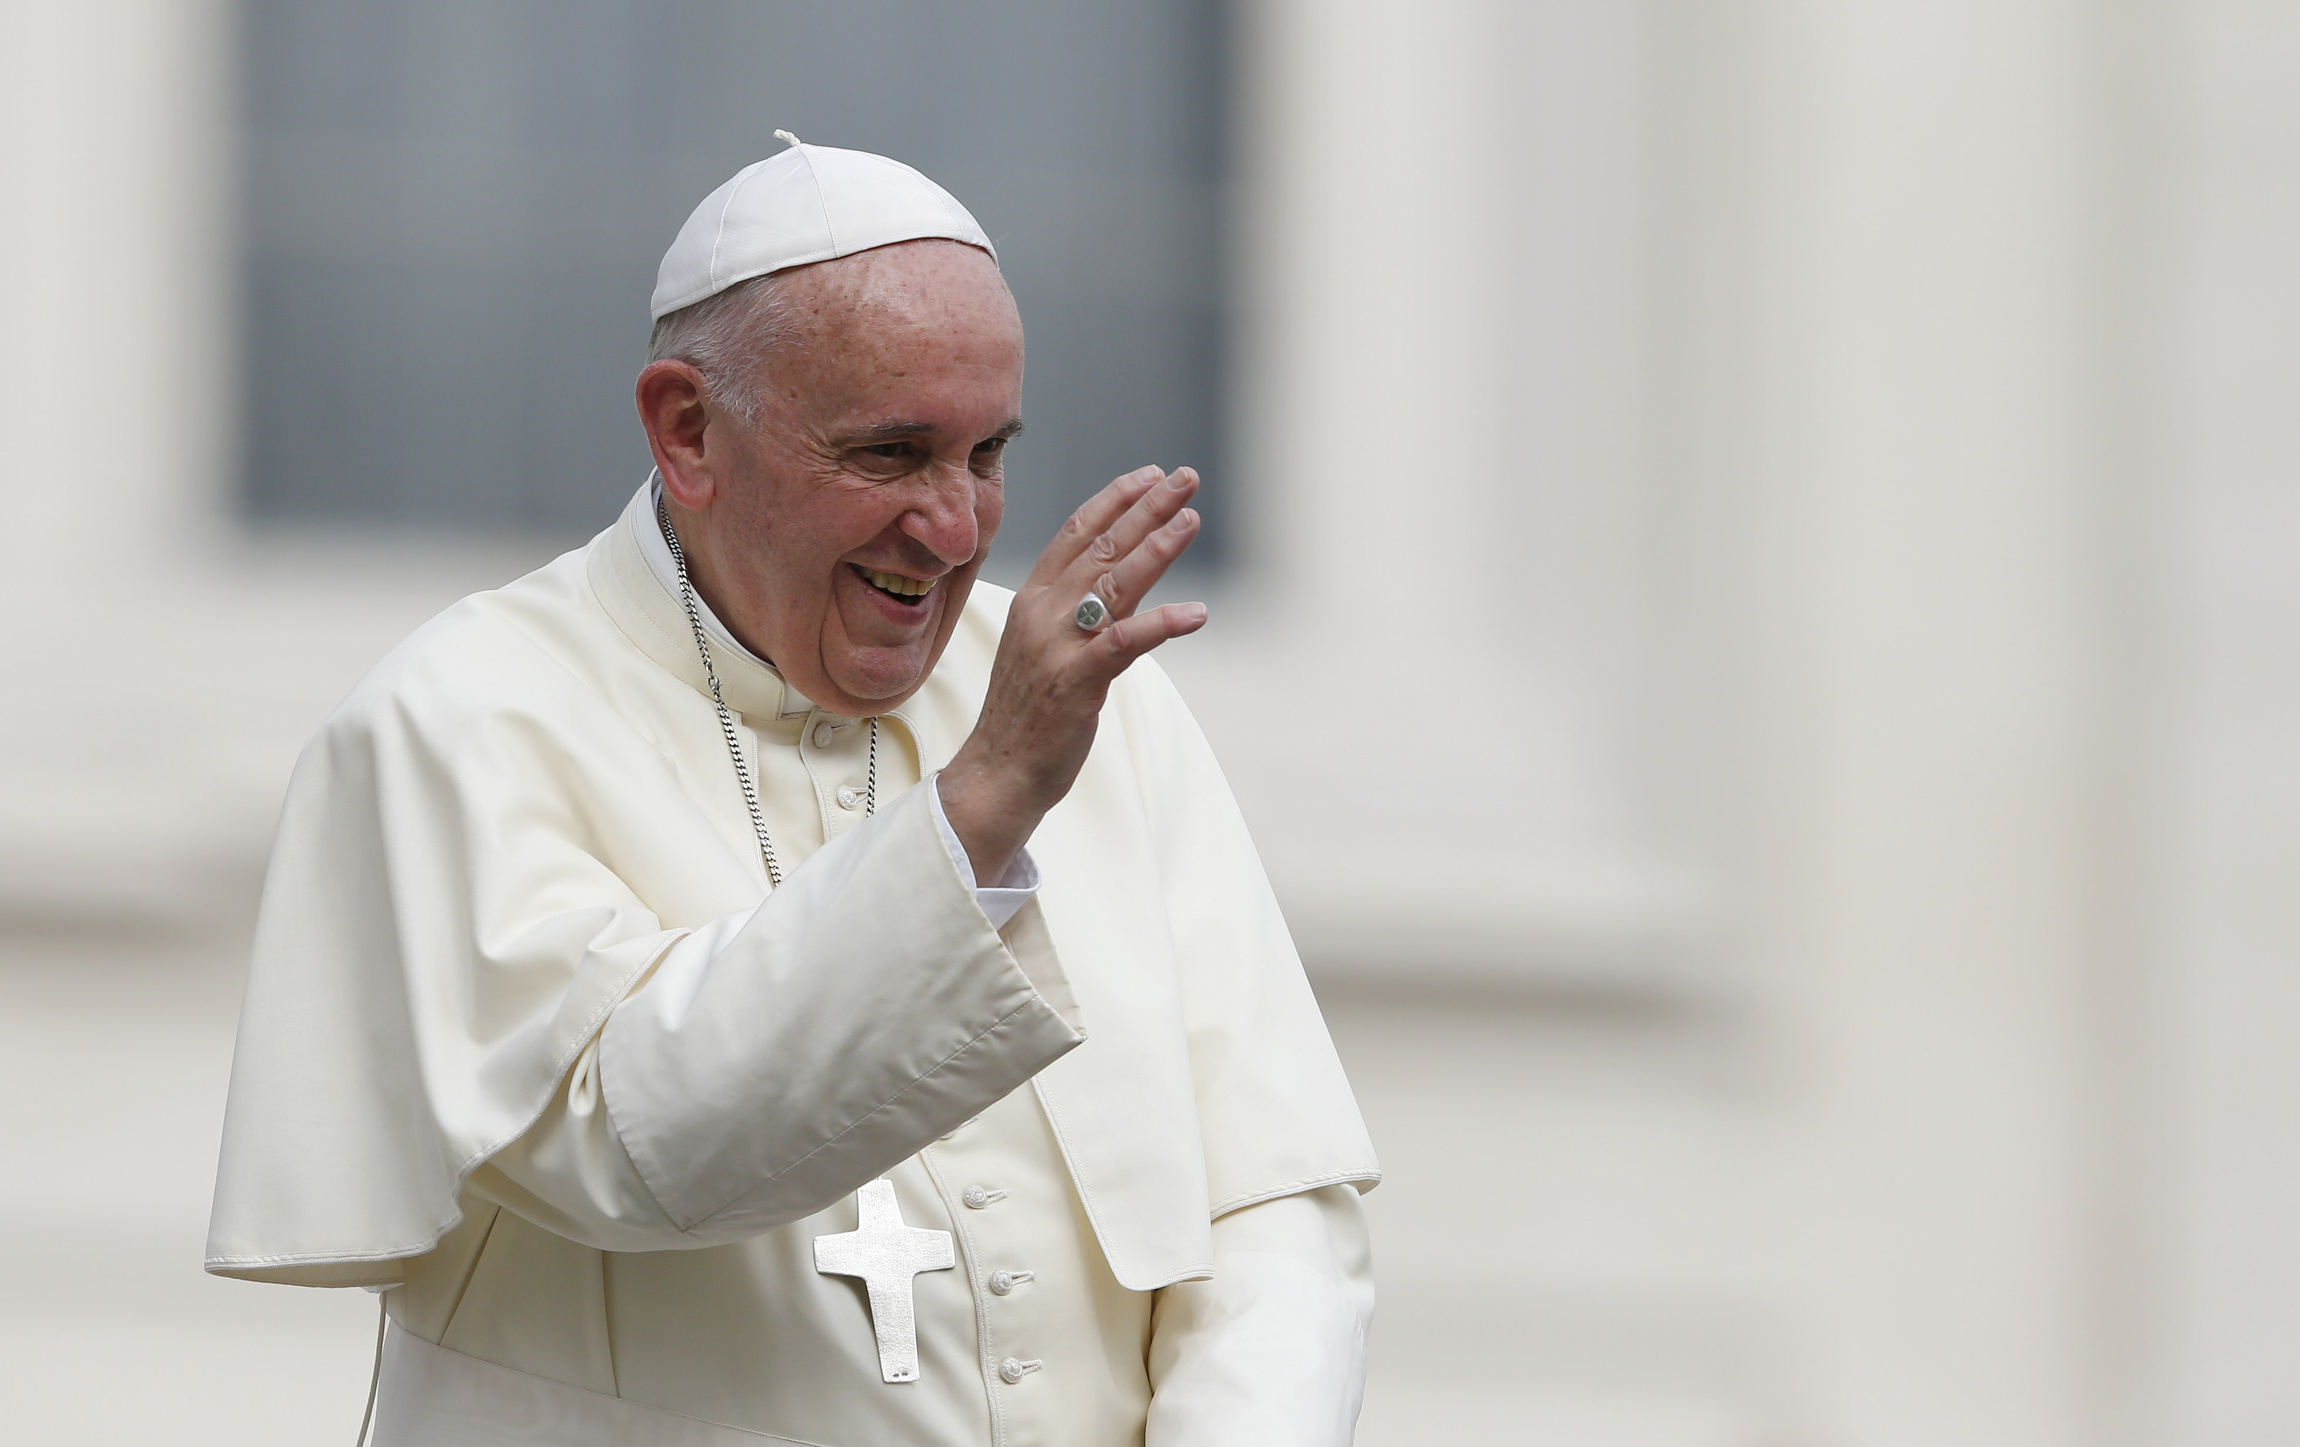 Pope Francis waves as he leaves his general audience in St. Peter's Square at the Vatican Sept. 16. (CNS/Paul Haring)